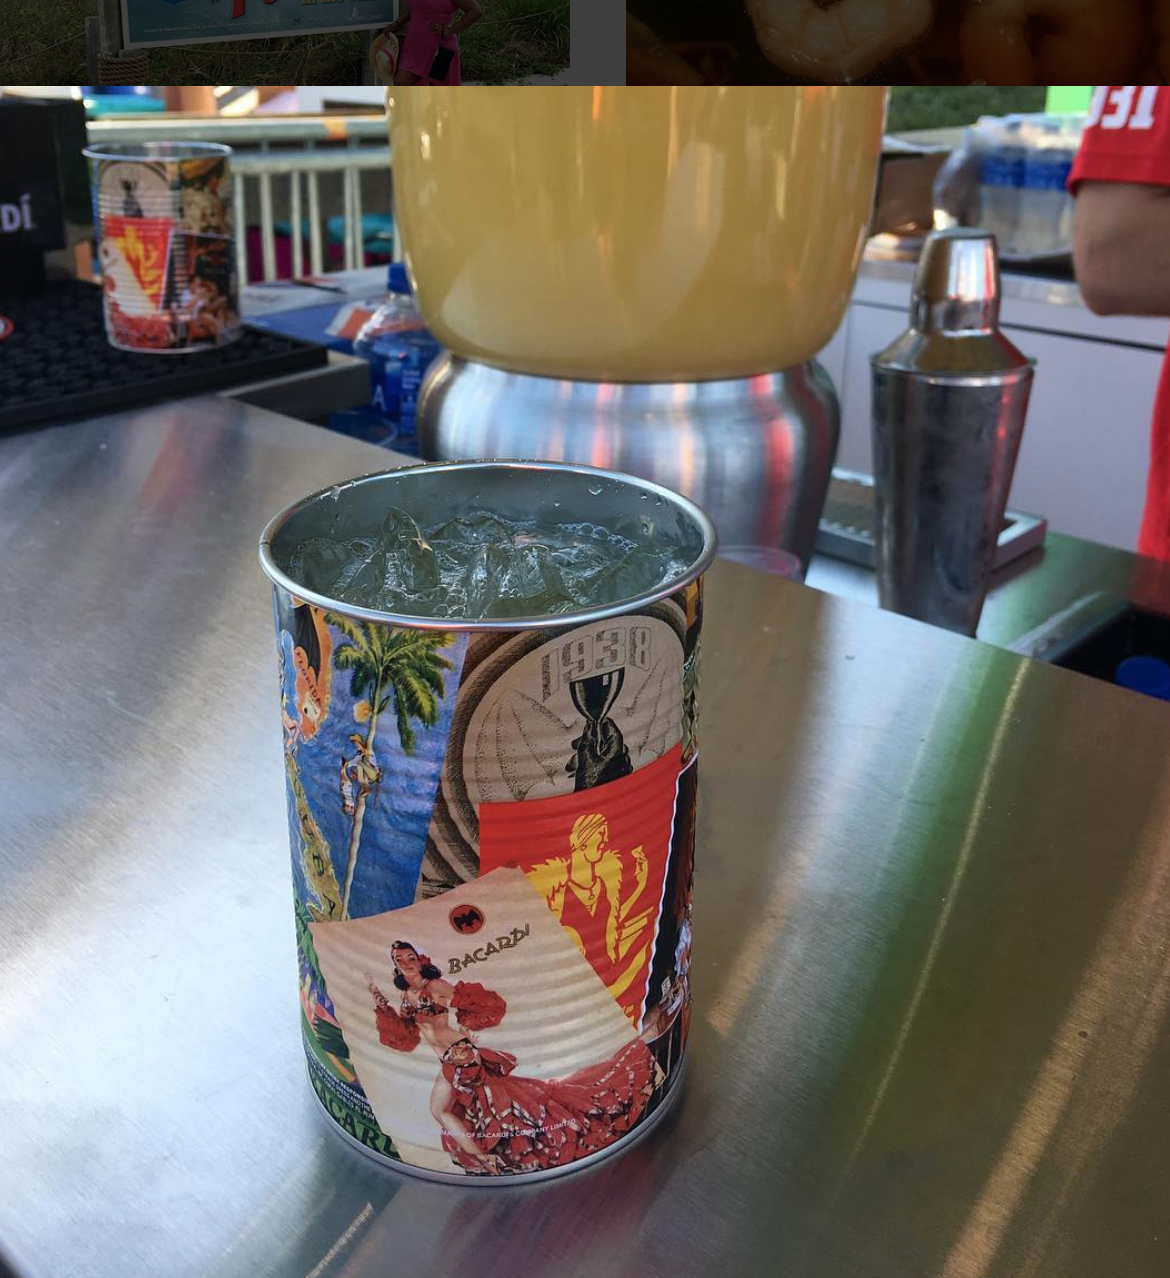 Tin Can Cups  Drinkware - Custom Branded Products - RP & Associates